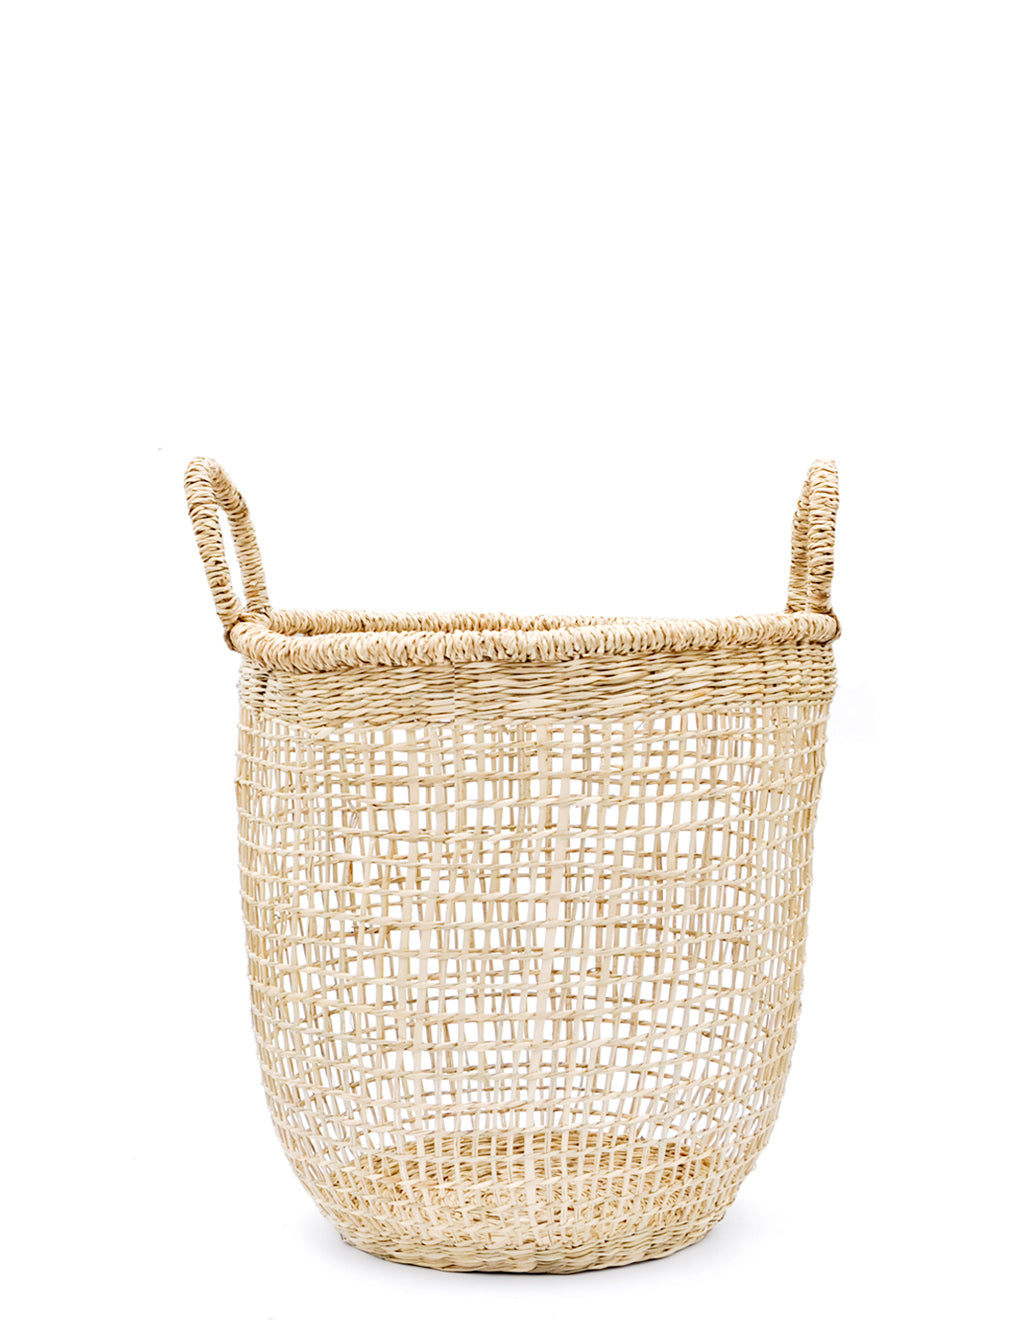 Extra Small: Nesting Seagrass Storage Basket in Extra Small - LEIF